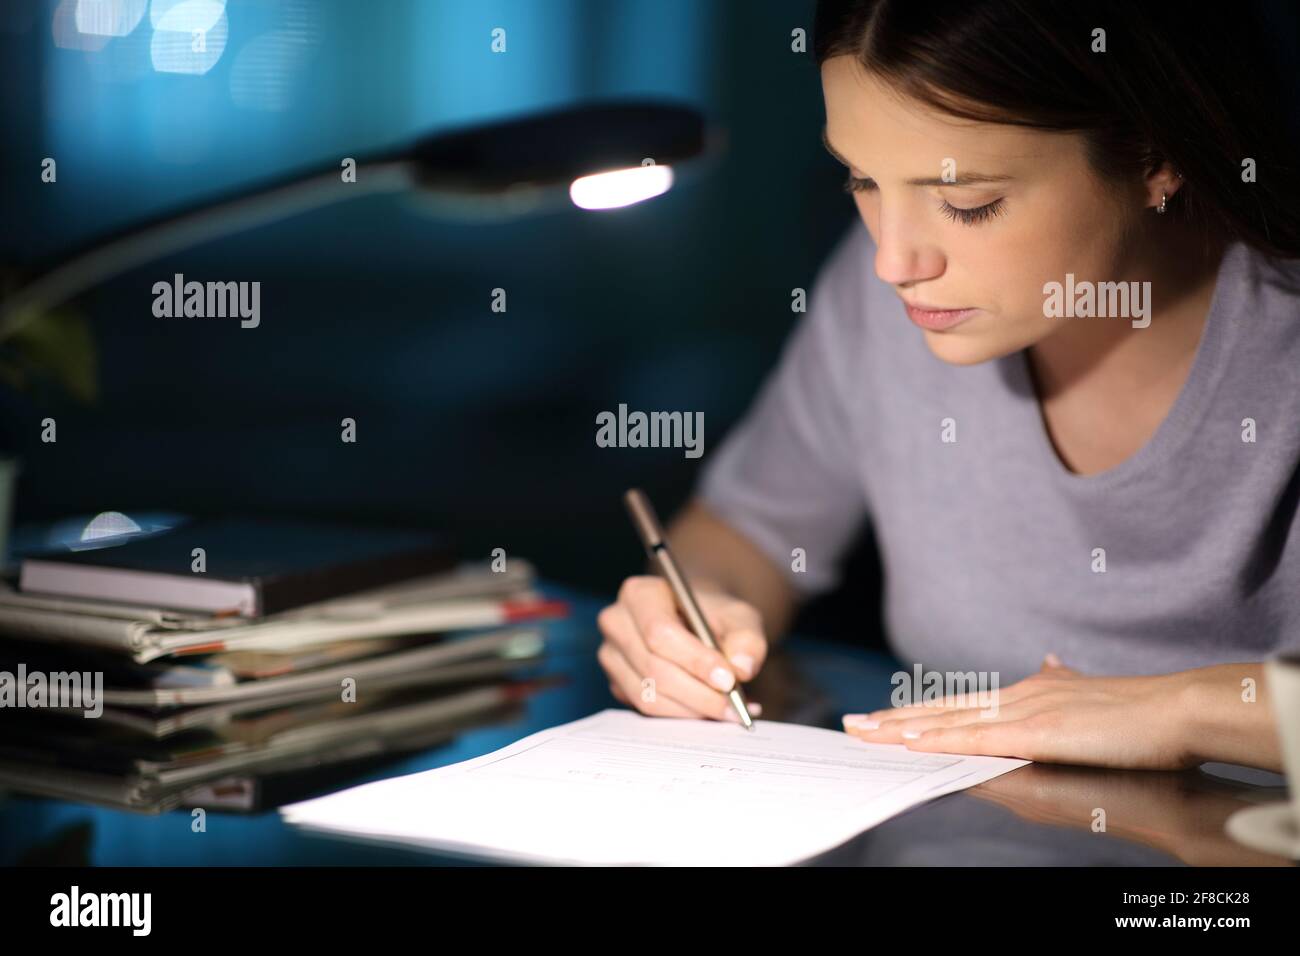 Serious woman signing form in the night at home Stock Photo